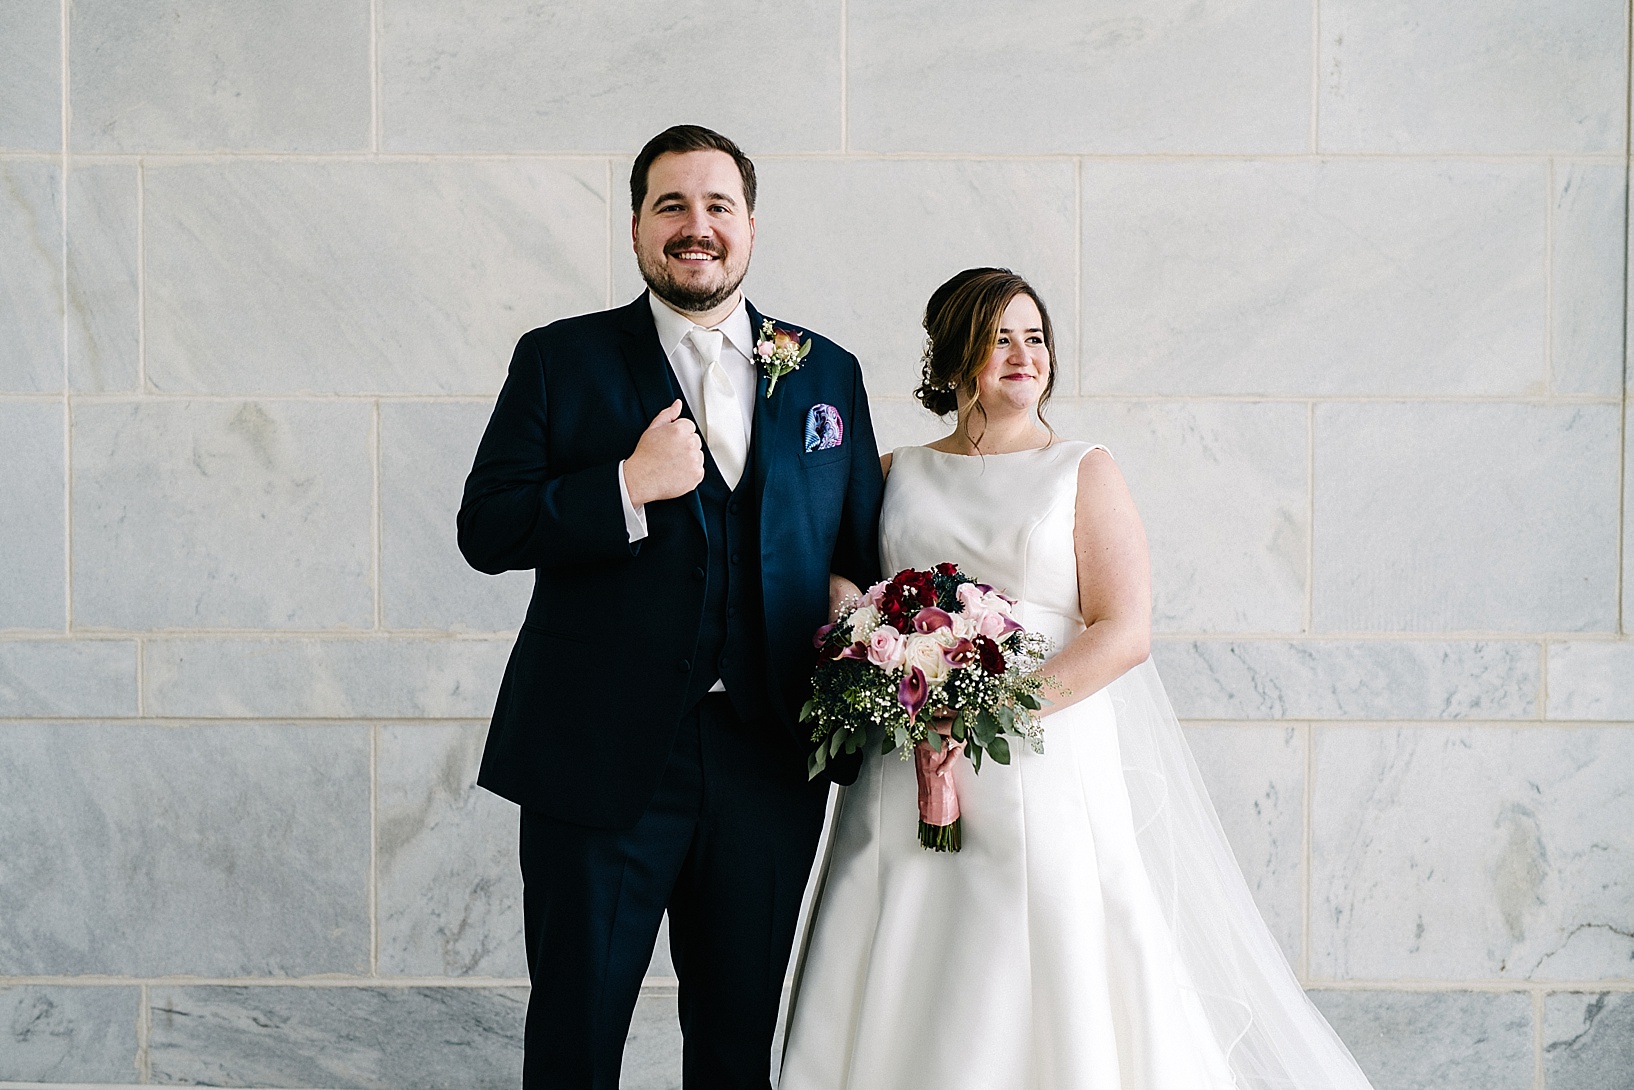 wedding photos at the Butler Institute of American Art